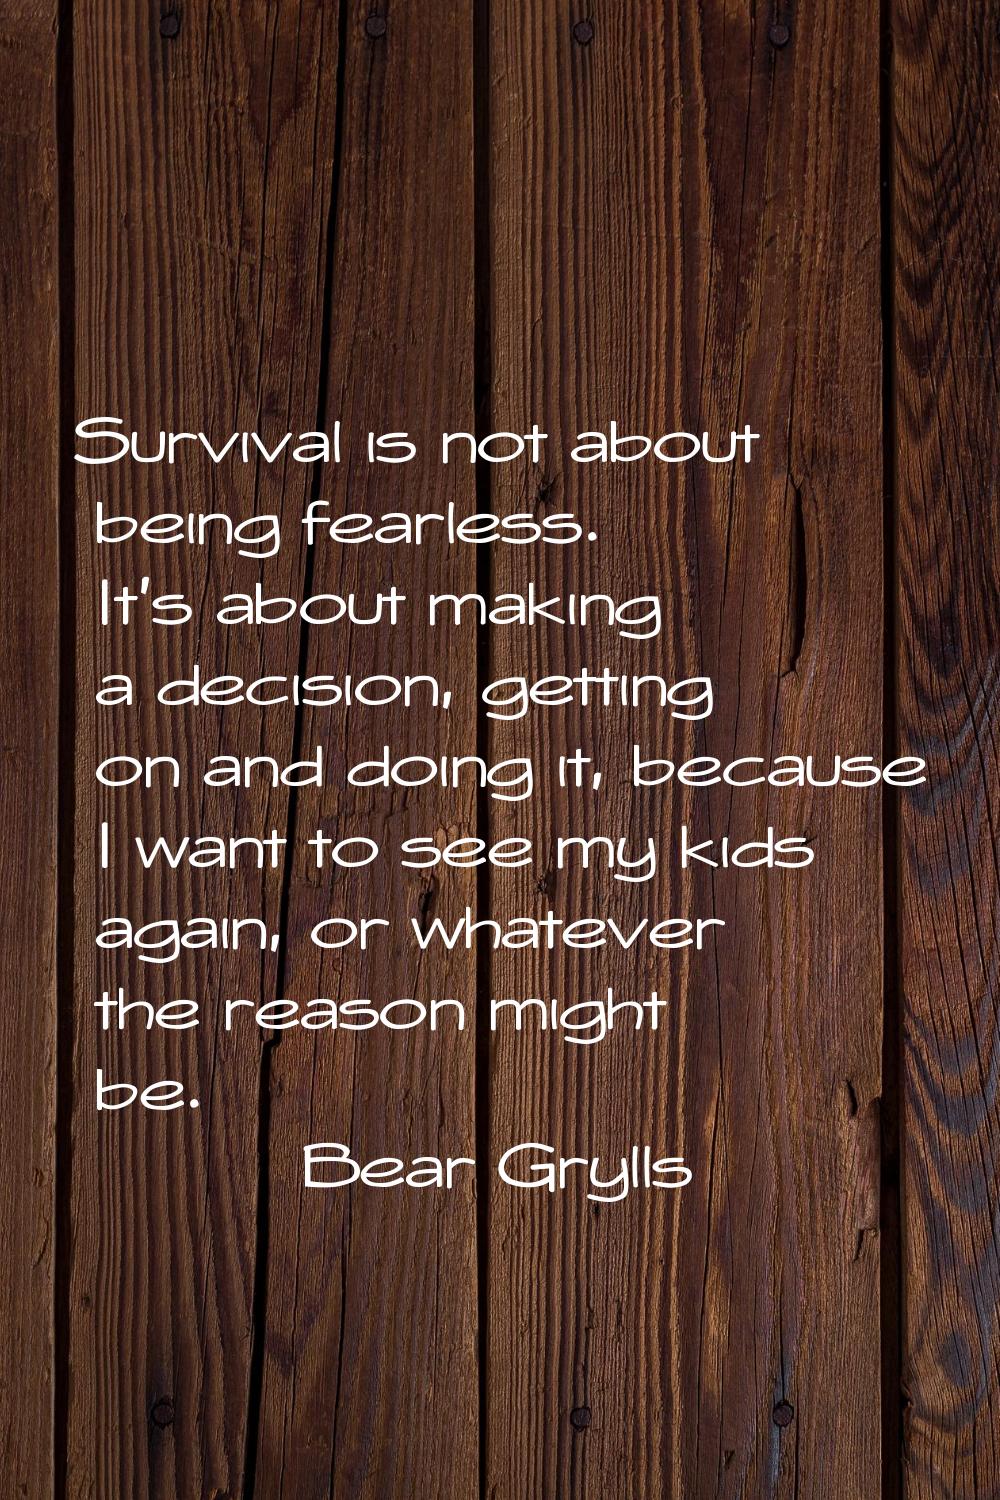 Survival is not about being fearless. It's about making a decision, getting on and doing it, becaus